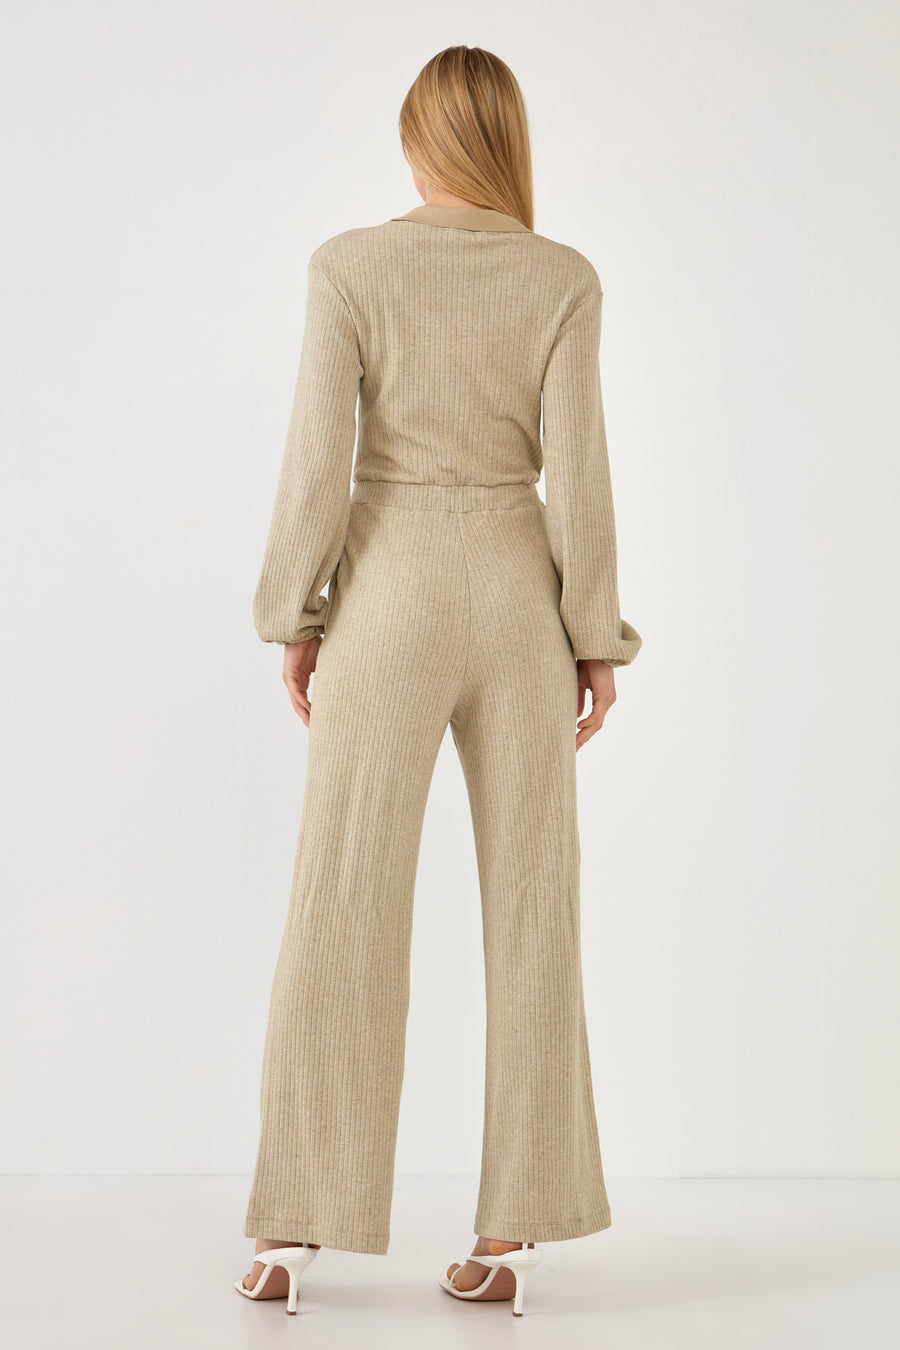 Collared Knit Jumpsuit